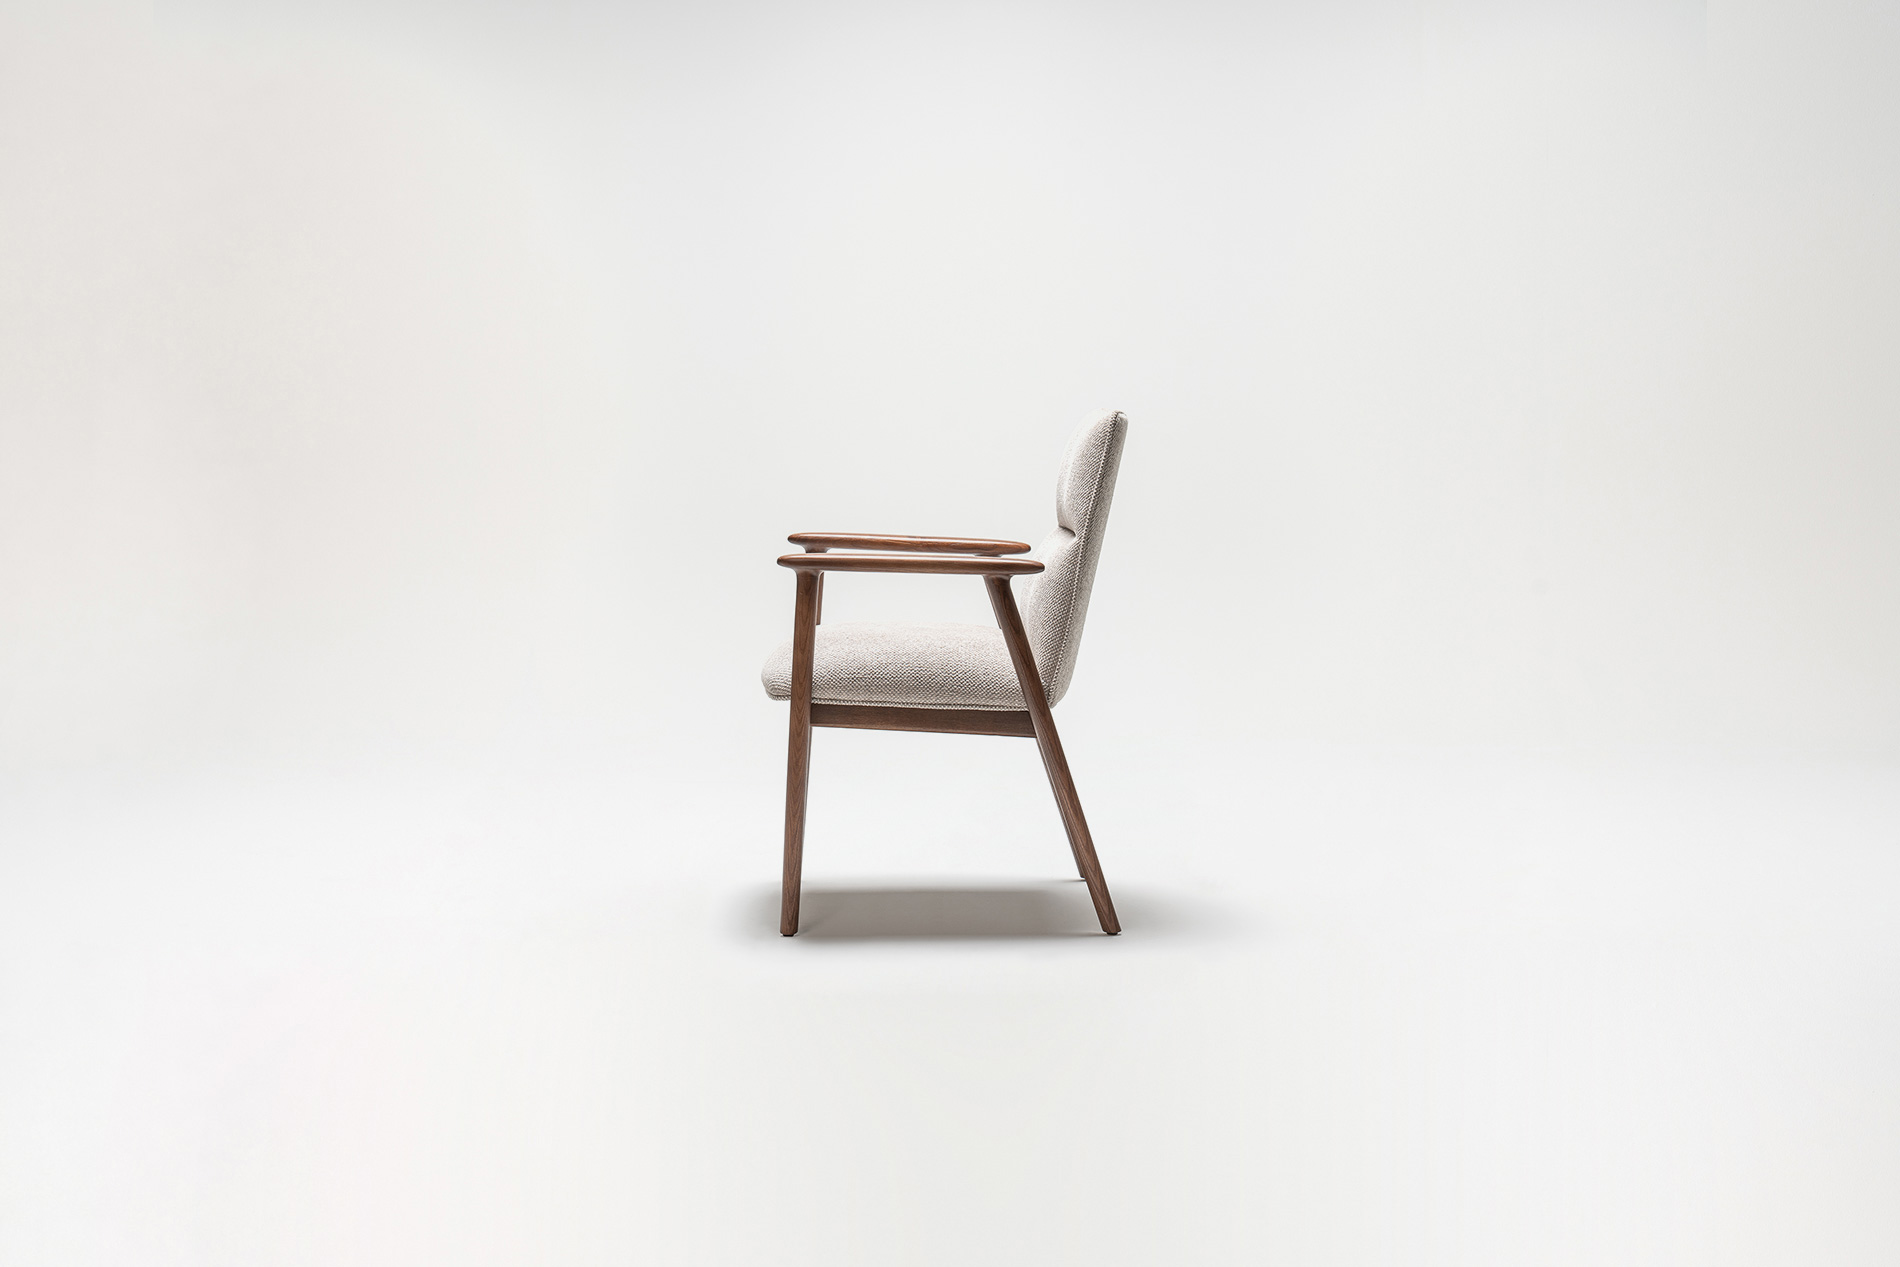 Presenting a chair that's not just furniture but a work of art for your living space.URIAH KOLTUK